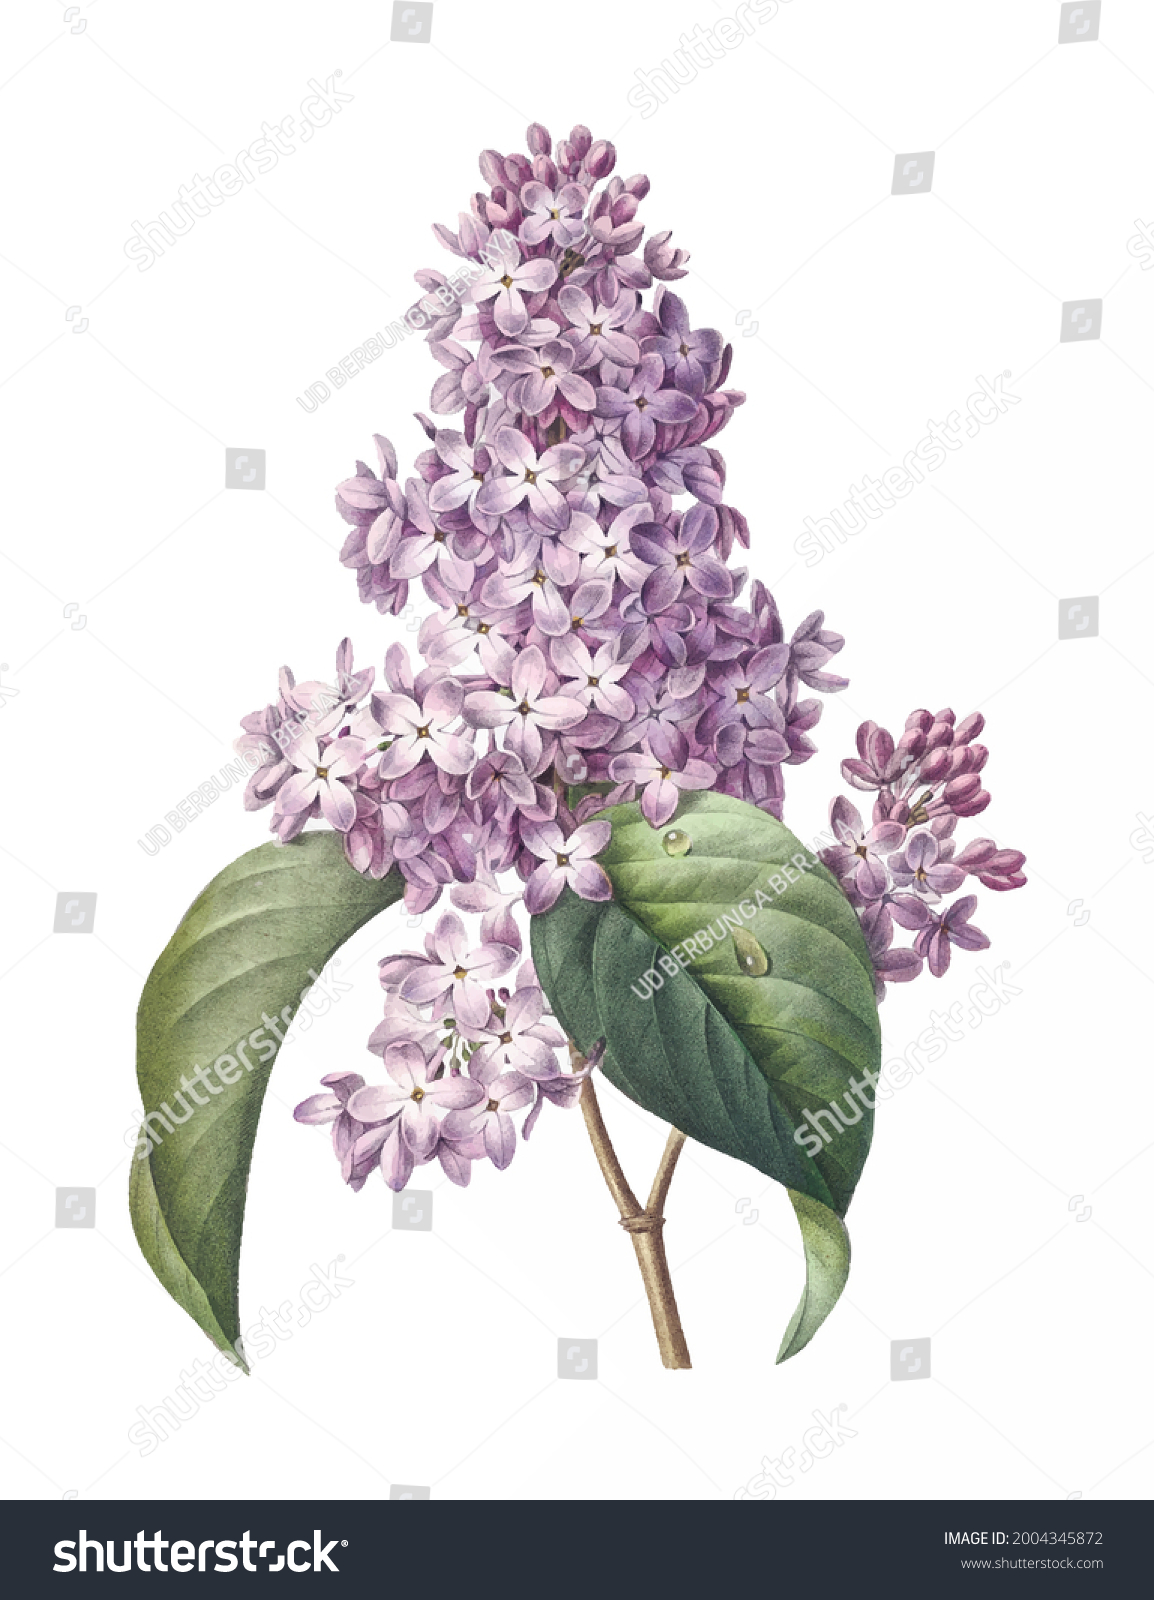 SVG of Vintage drawn illustration of Lilac free download shutterstock perfect for fabrics, t-shirts, mugs, decals, pillows, logo, pattern and much more! svg